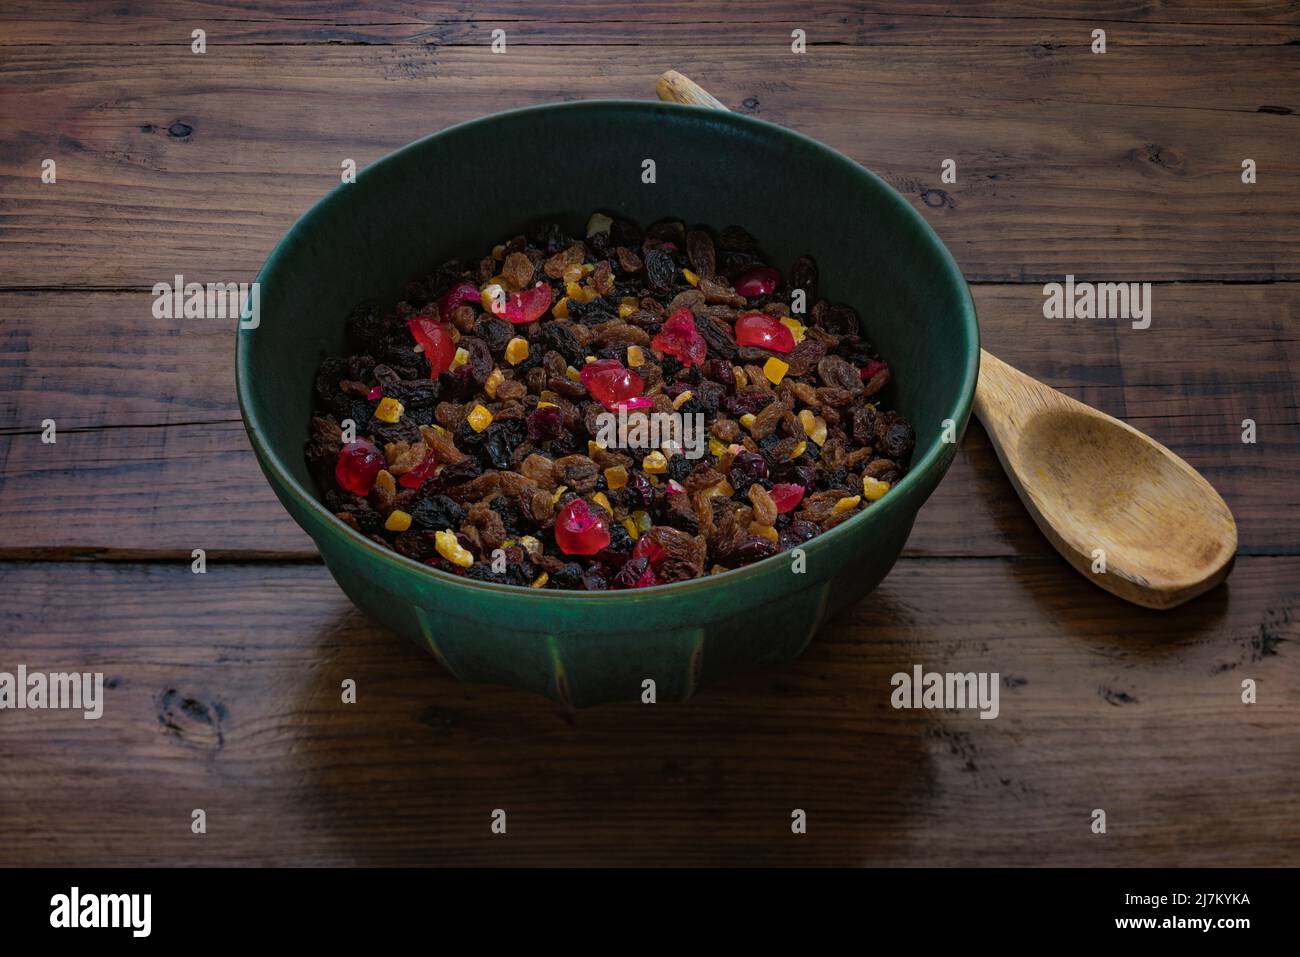 Dark green mixing bowl containing mixed dried fruit, along with a wooden spoon on a dark wooden work surface. Stock Photo